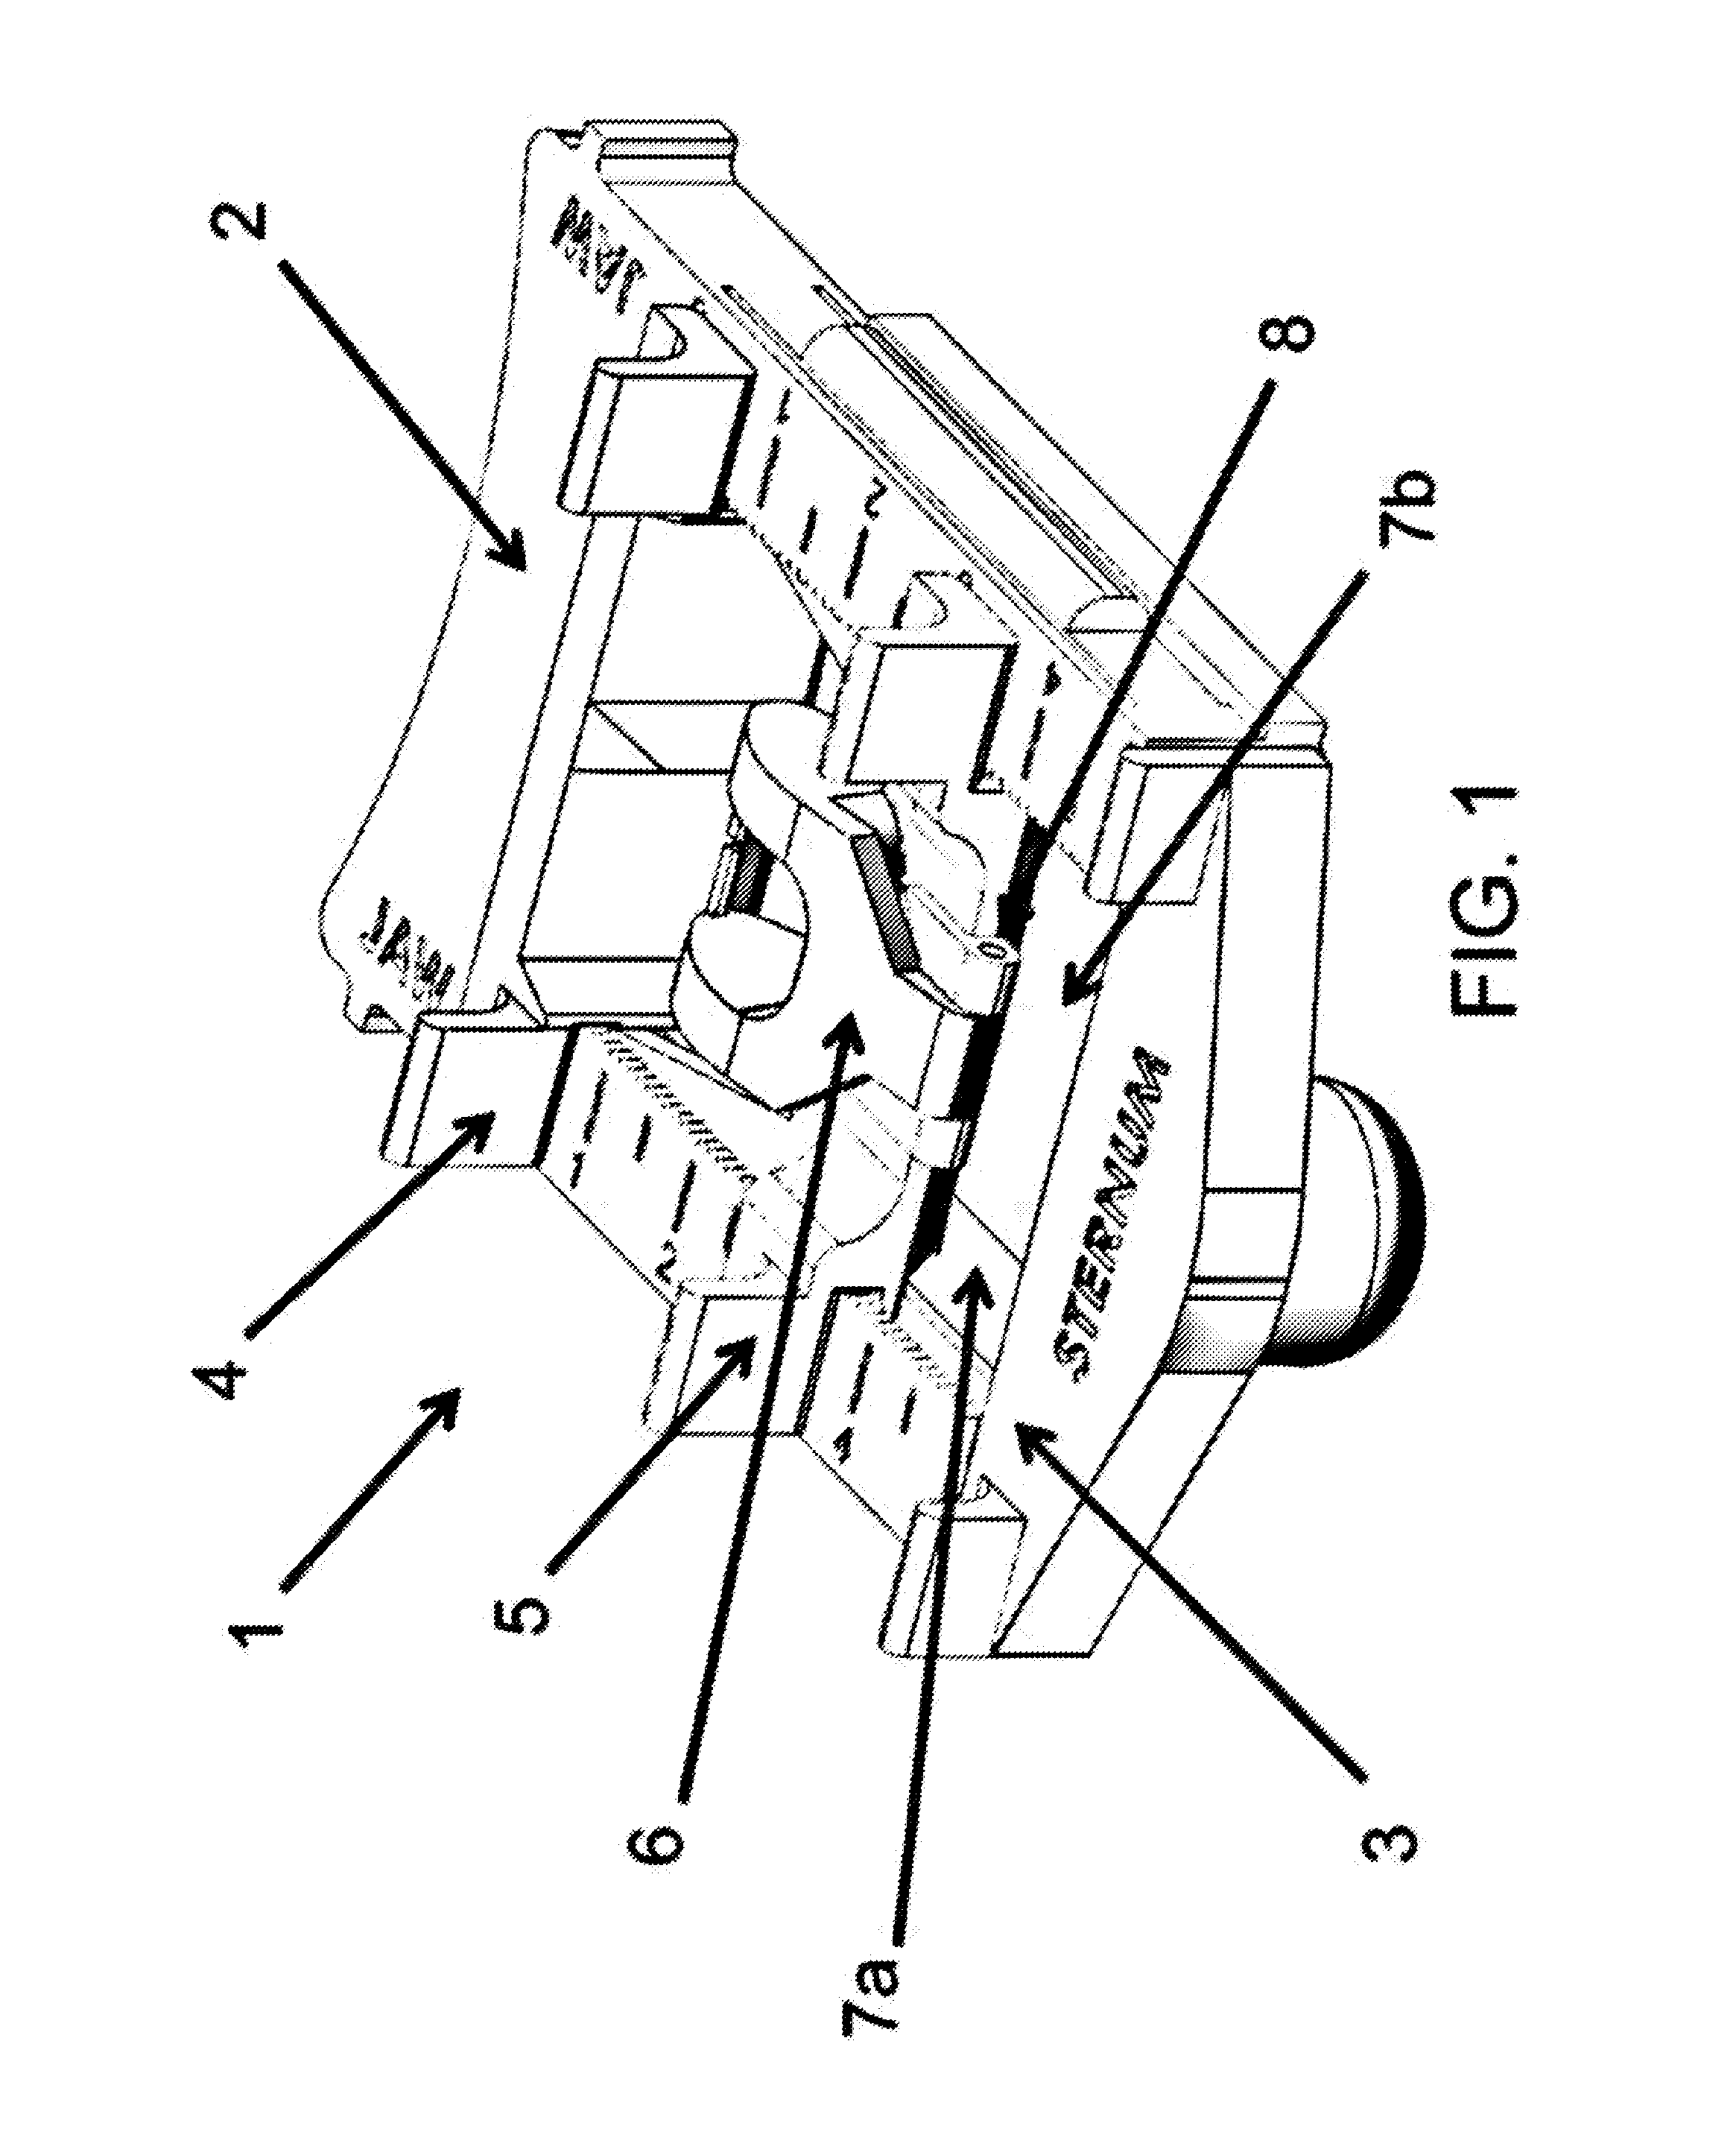 Assist device for medical procedures